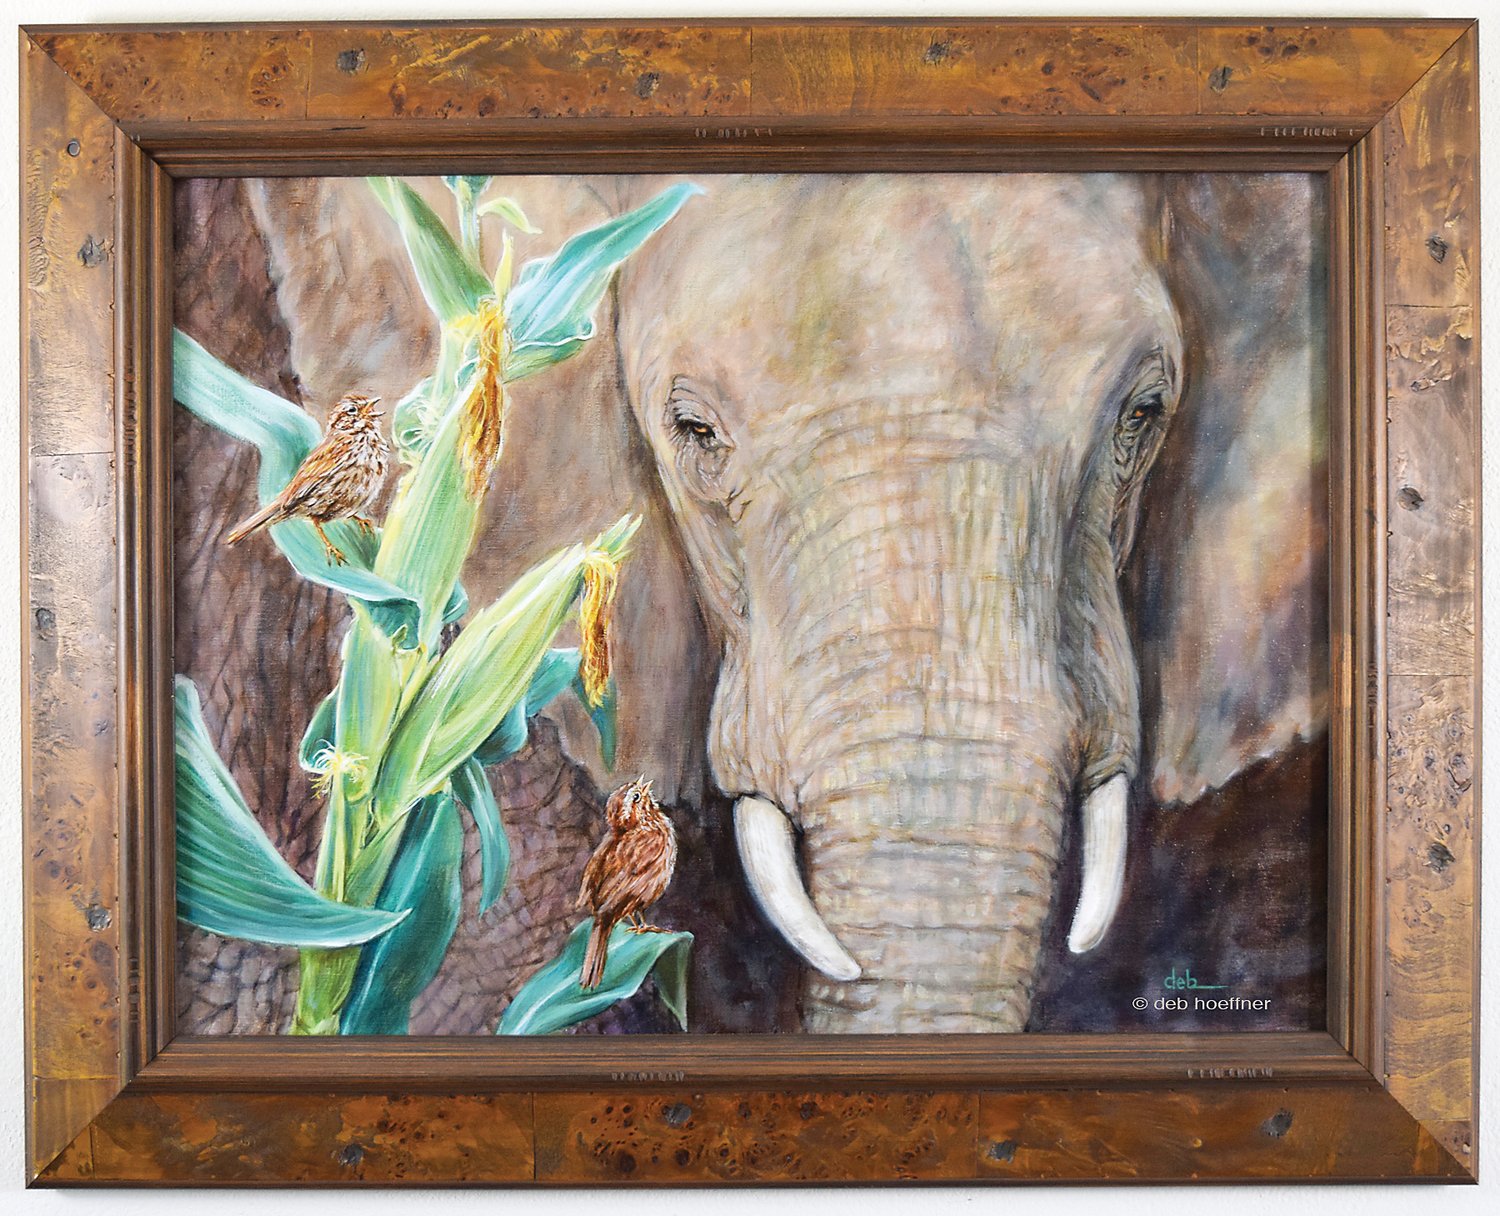 “An Elephant’s Eye” by Bucks County artist Deb Hoeffner was the winner of The Art of Oscar fundraising event at the former home of Oscar Hammerstein II in Doylestown.